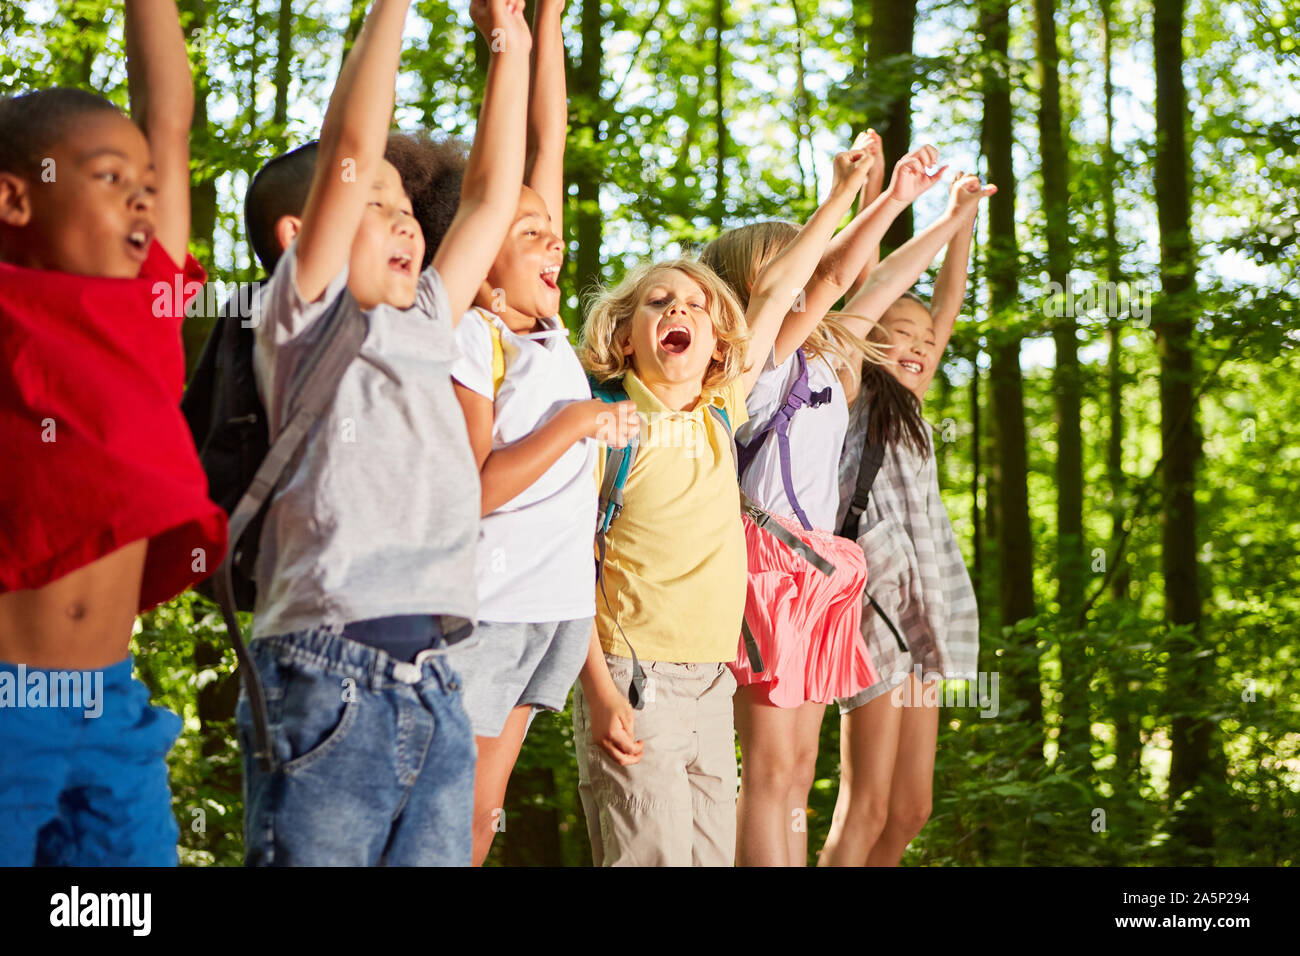 Group of kids cheer on the tour or hiking day in nature Stock Photo